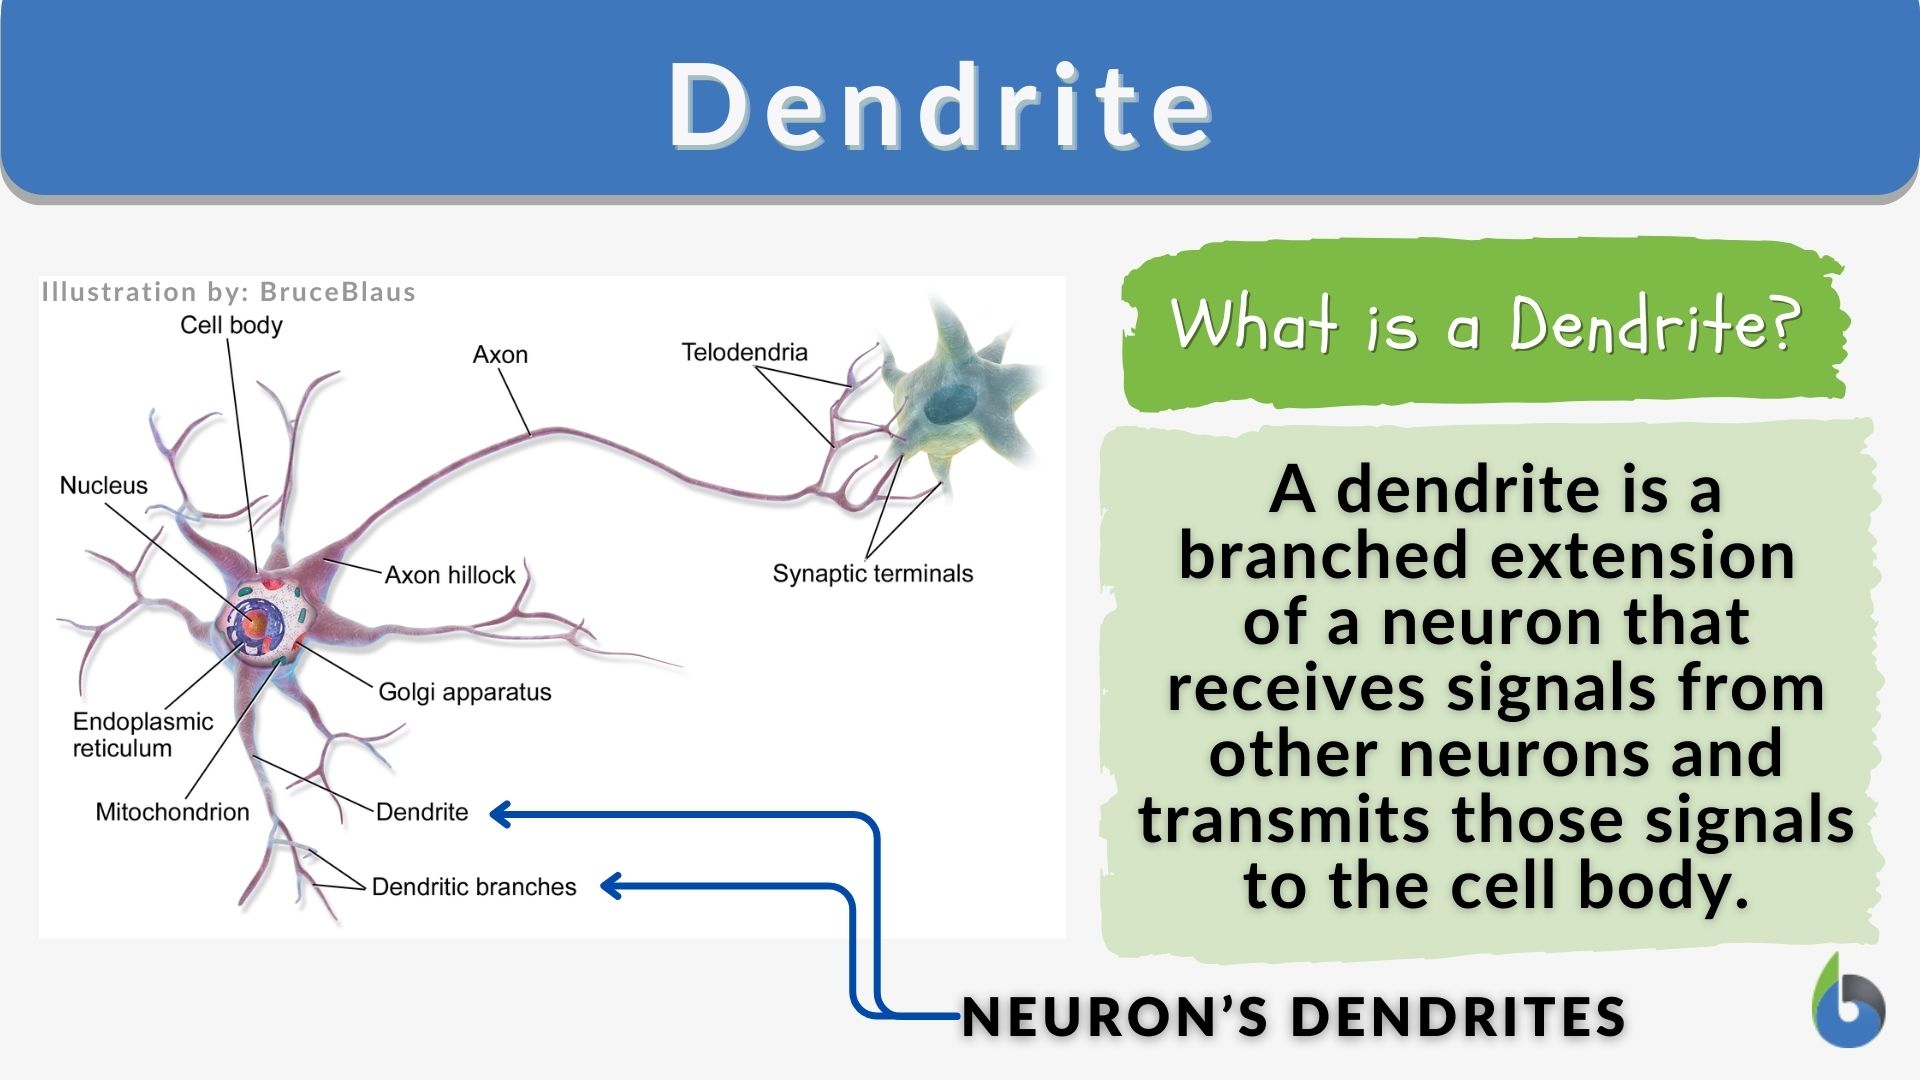 dendrite definition for third graders